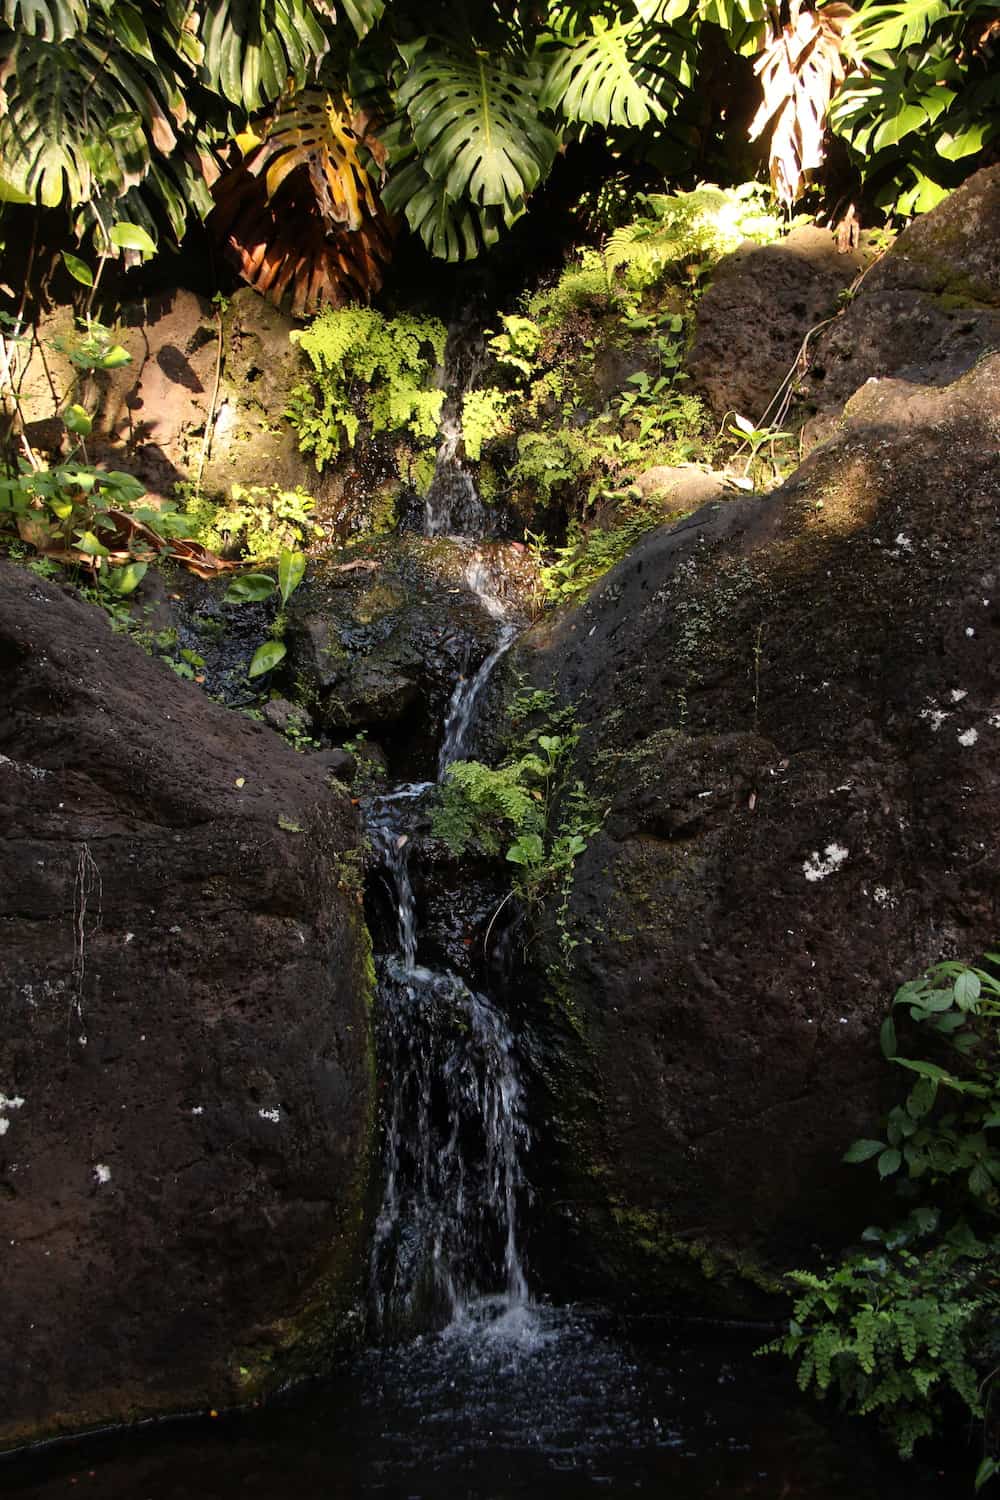 Water dripping down stones in tropical forest